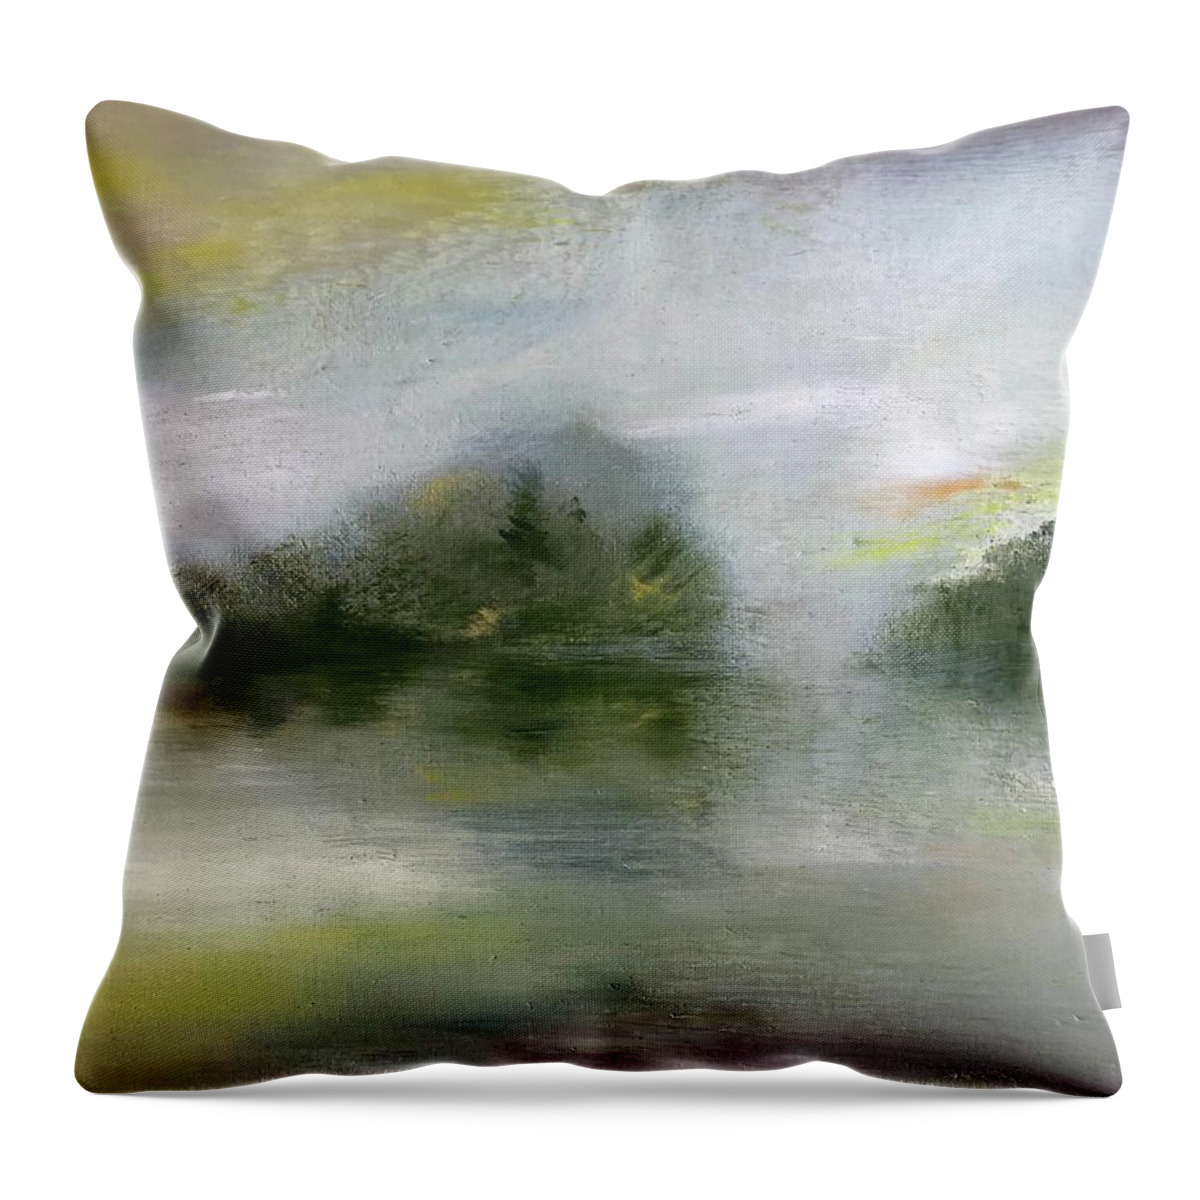 Riverbend Throw Pillow featuring the painting Riverbend by Roger Clarke